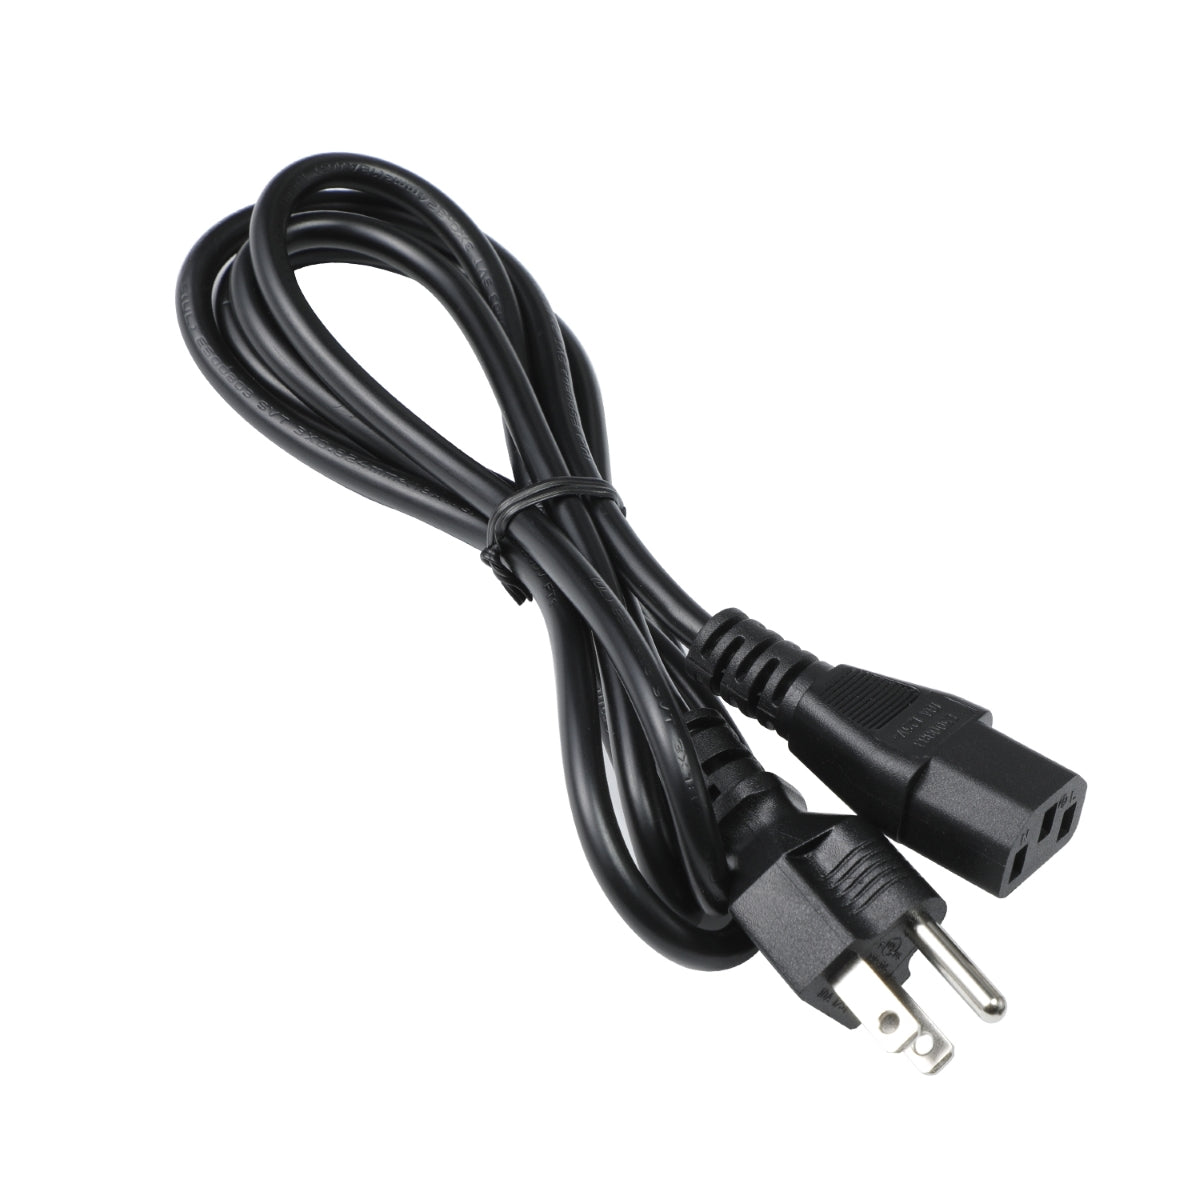 Power Cord for Acer VG271U Monitor.